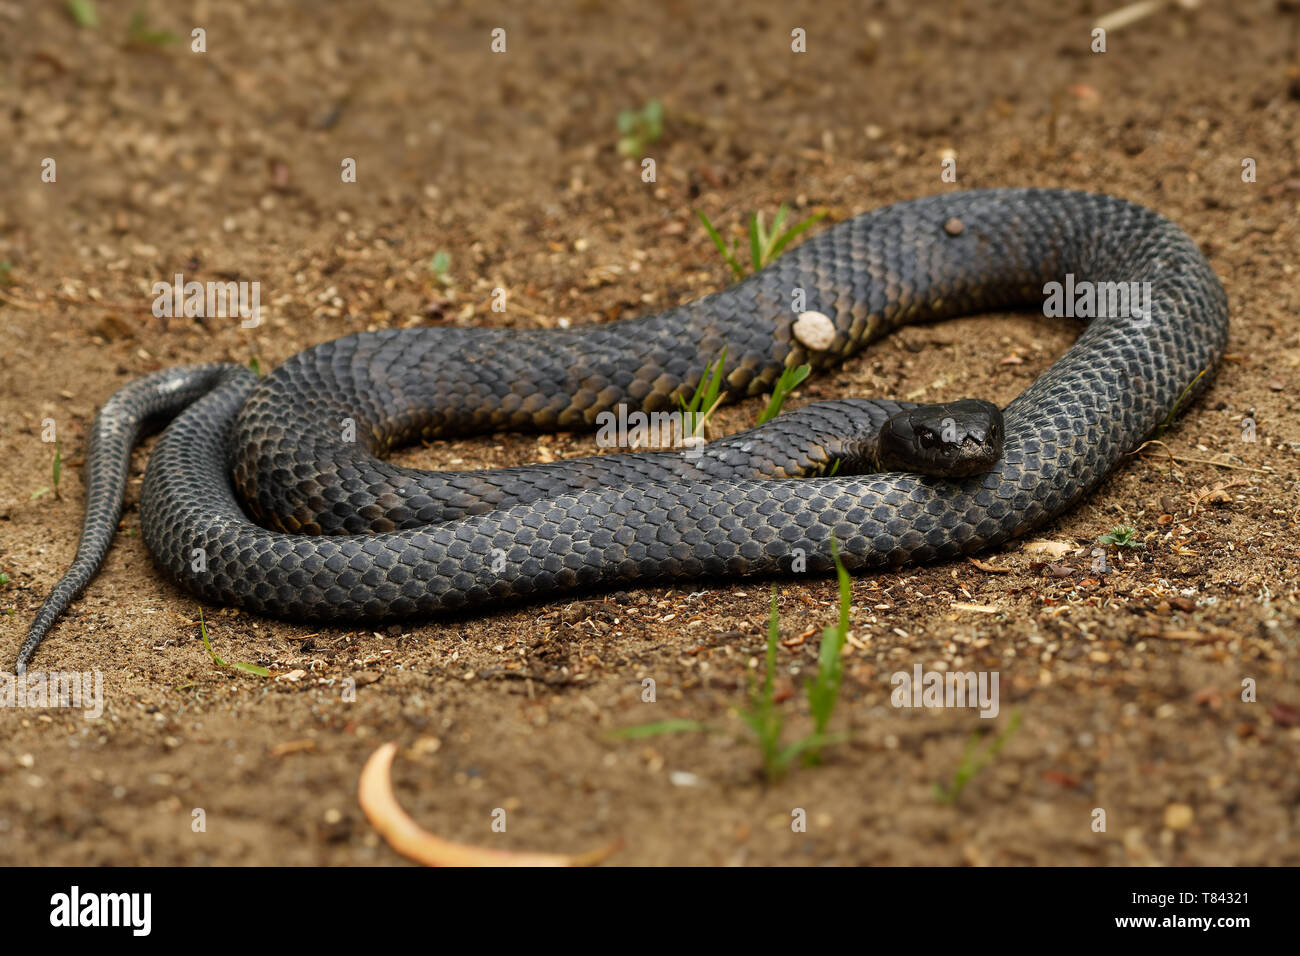 Tiger snake - Notechis scutatus highly venomous snake species found in Australia, Tasmania. These snakes are highly variable in their colour, often ba Stock Photo